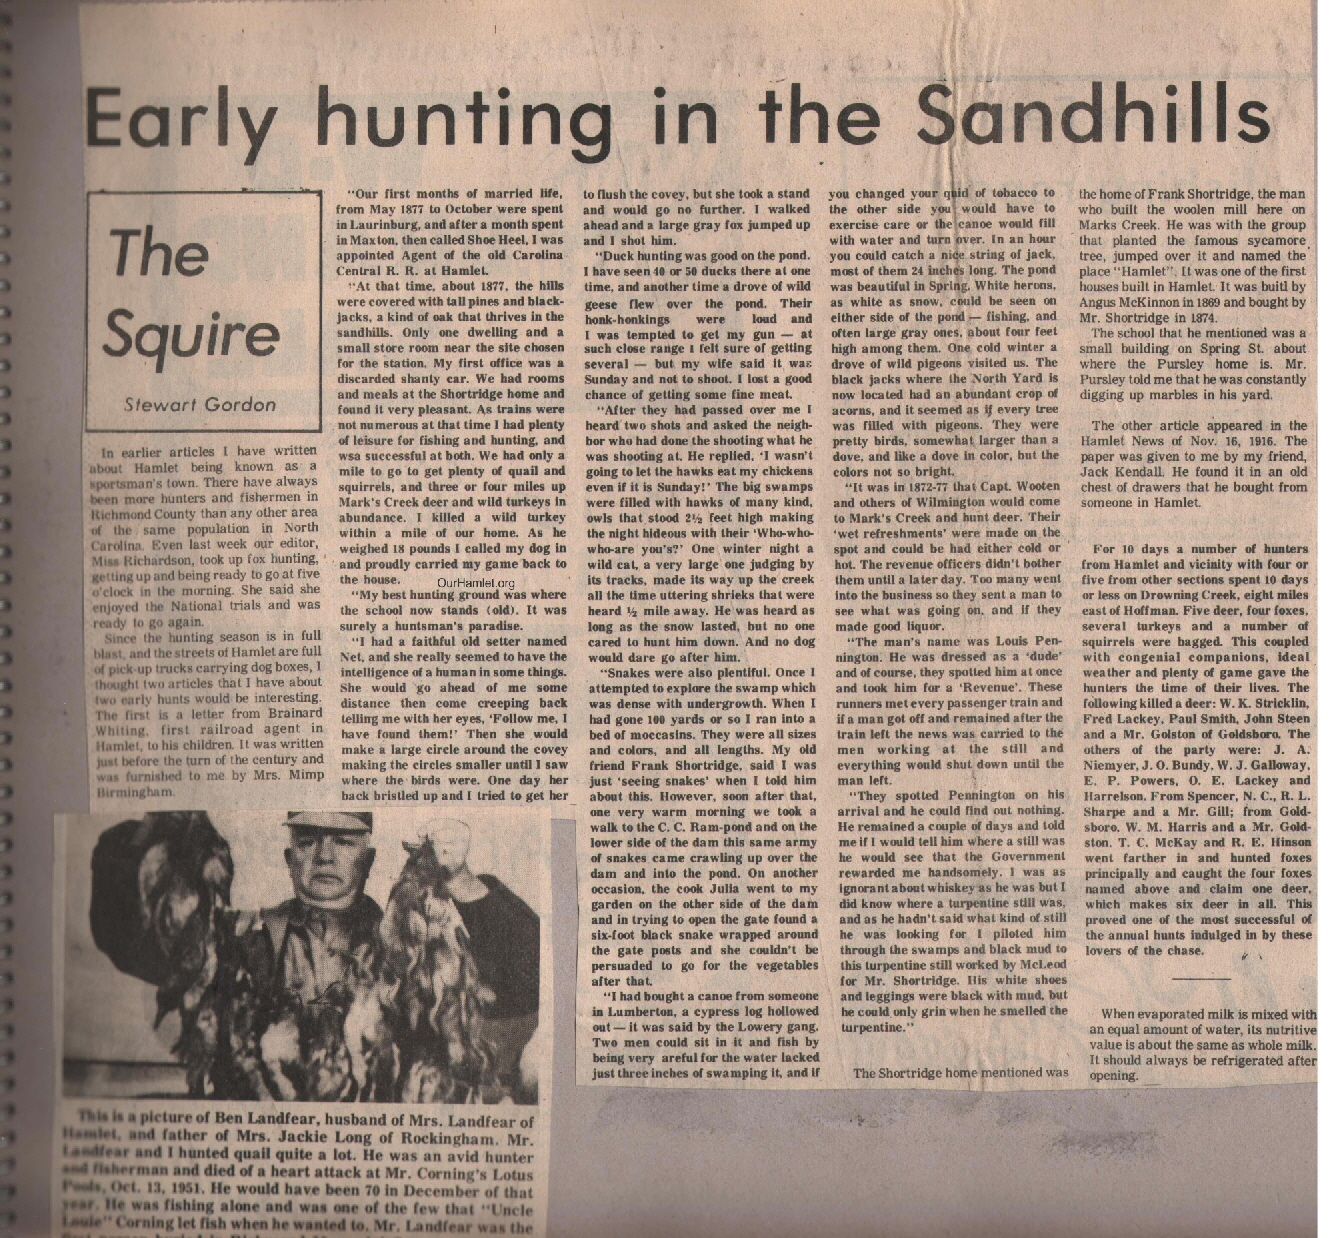 The Squire - Early Hunting in the Sandhills OH